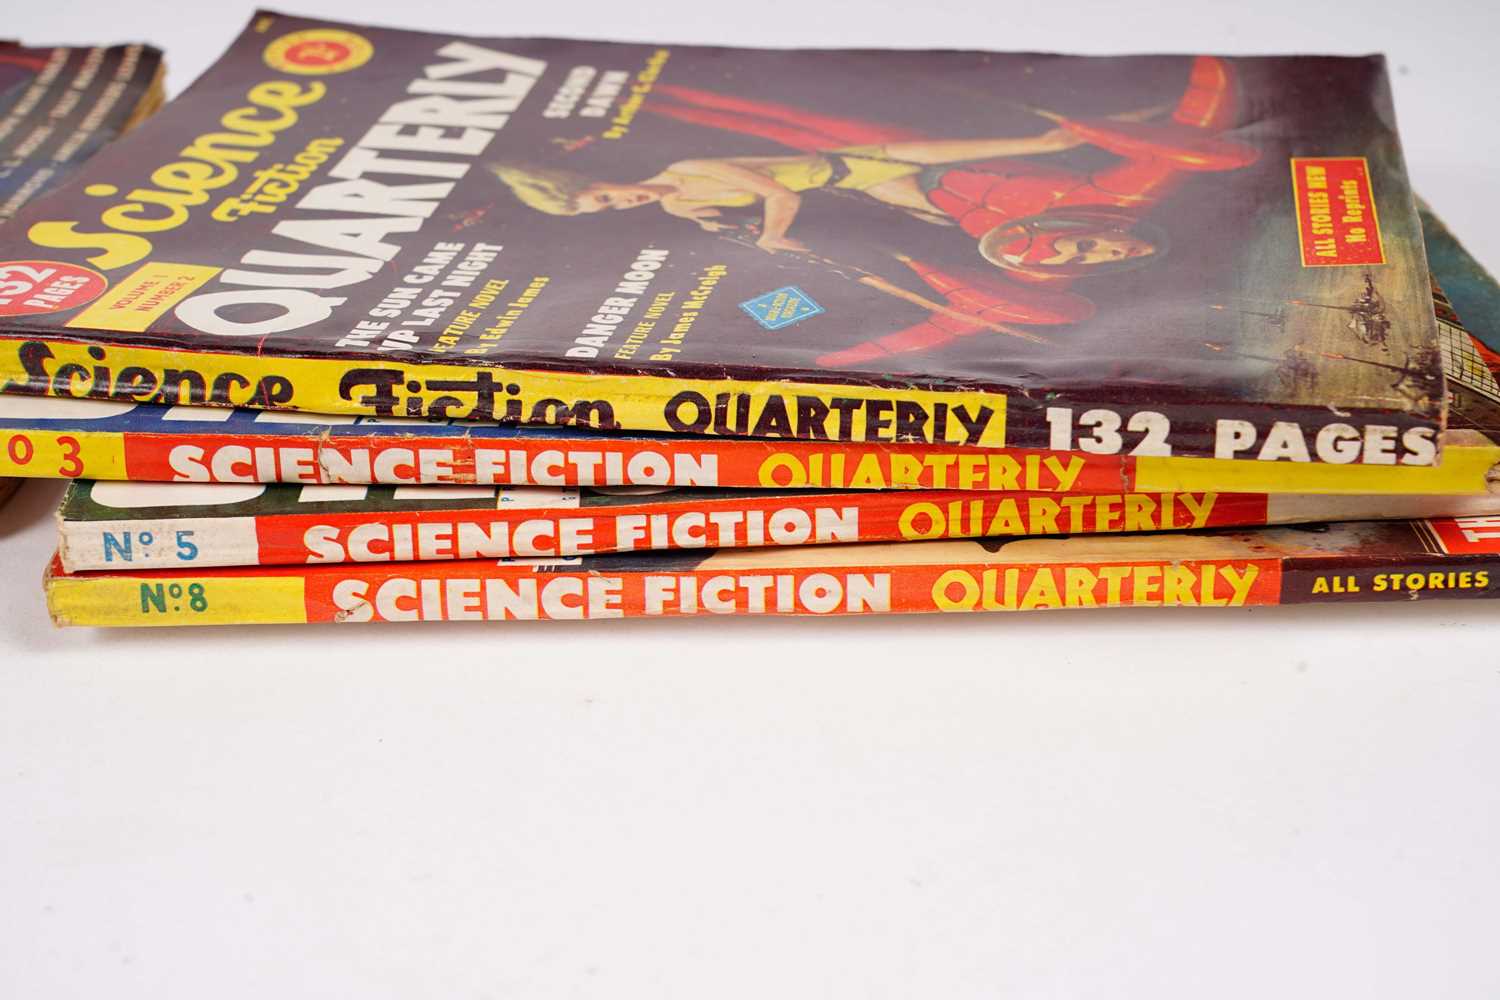 Pulp Science Fiction Magazines - Image 4 of 4